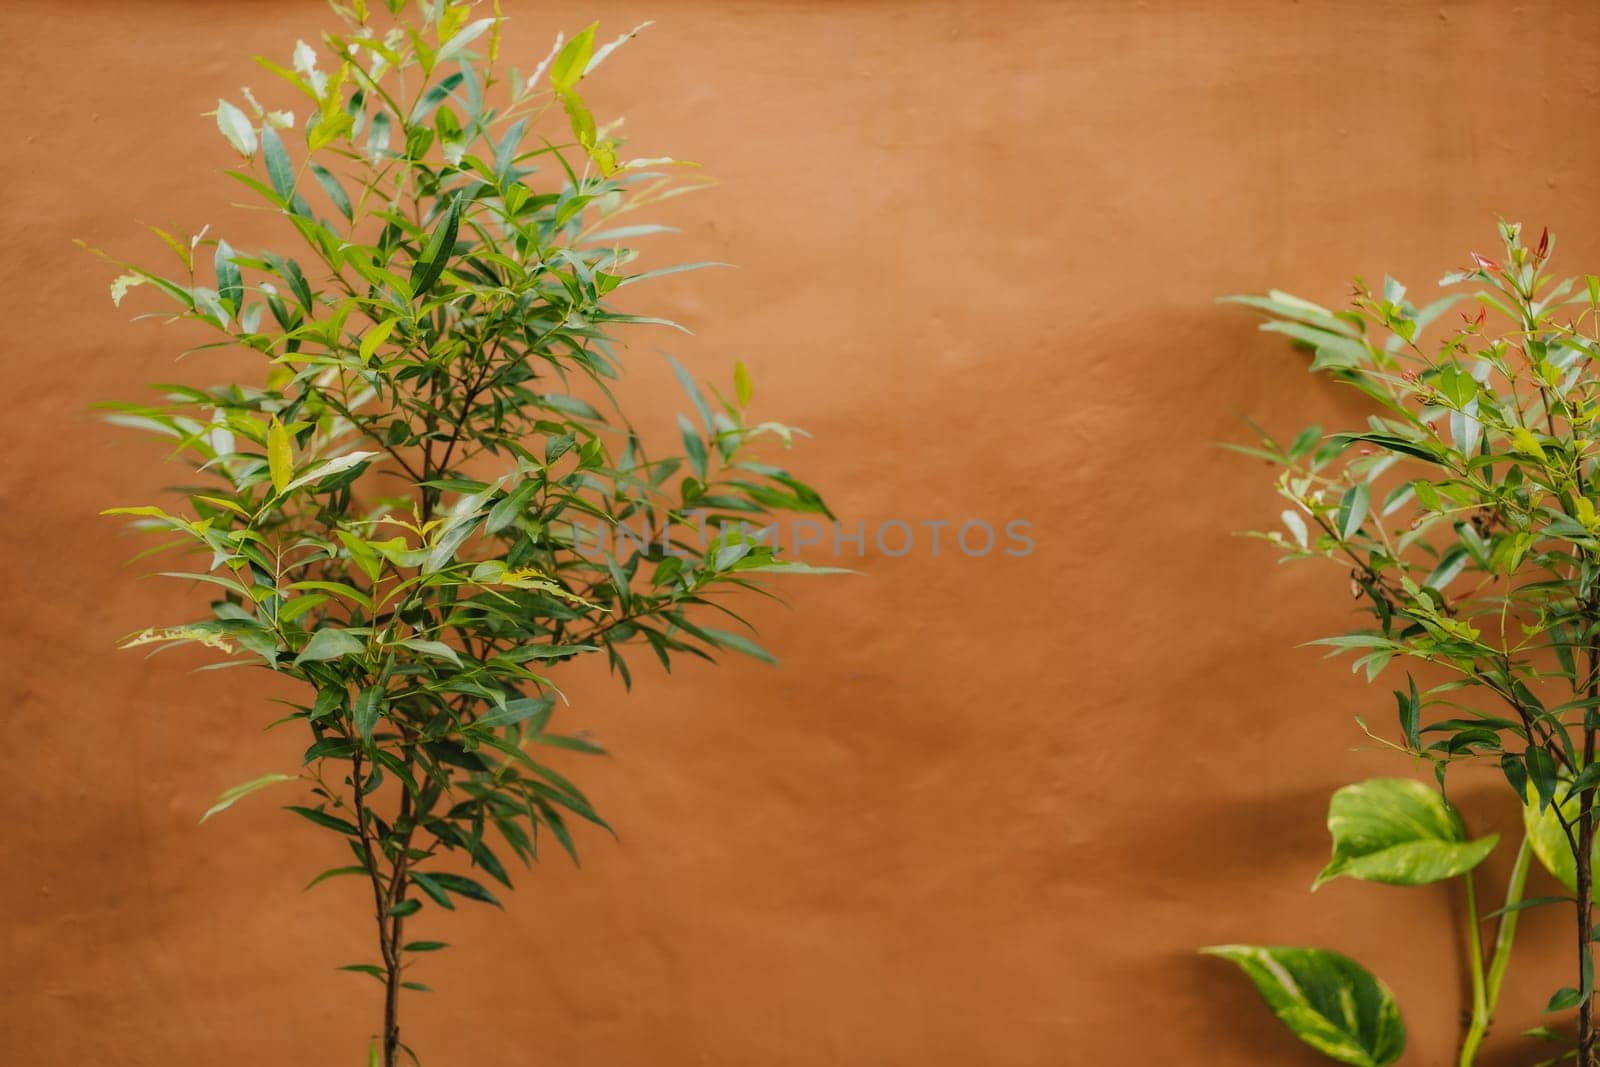 Green small tree on orange clay wall background. Decorative olive tree branch botanical